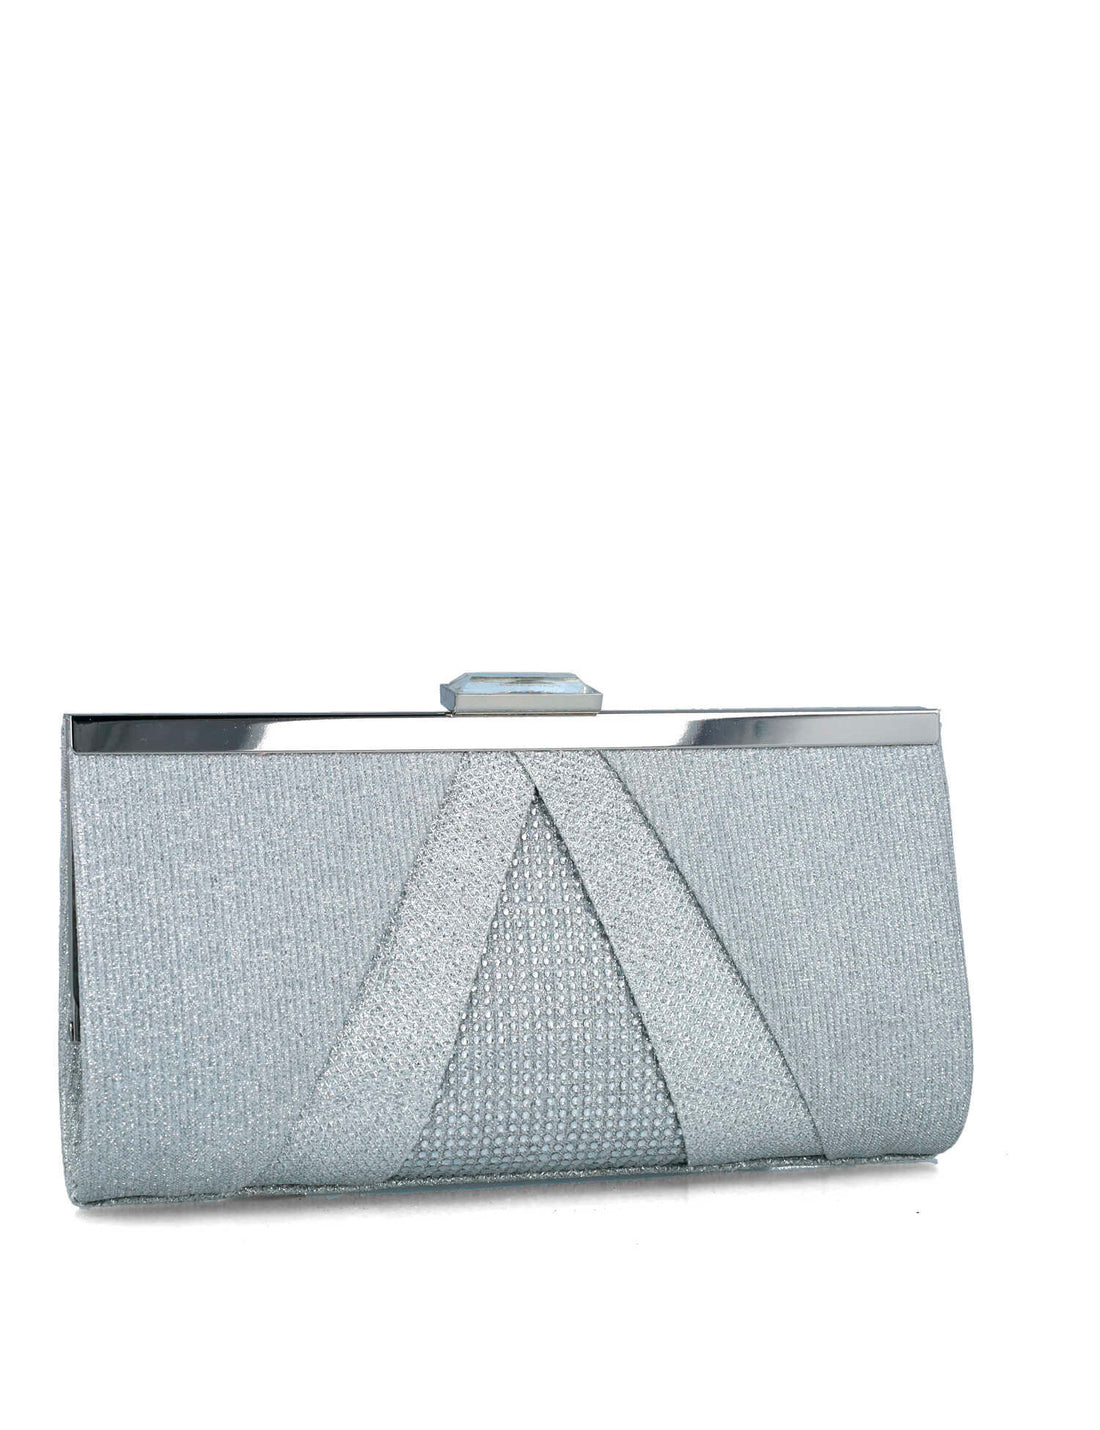 Silver Clutch With Silver Hardware_85511_09_02